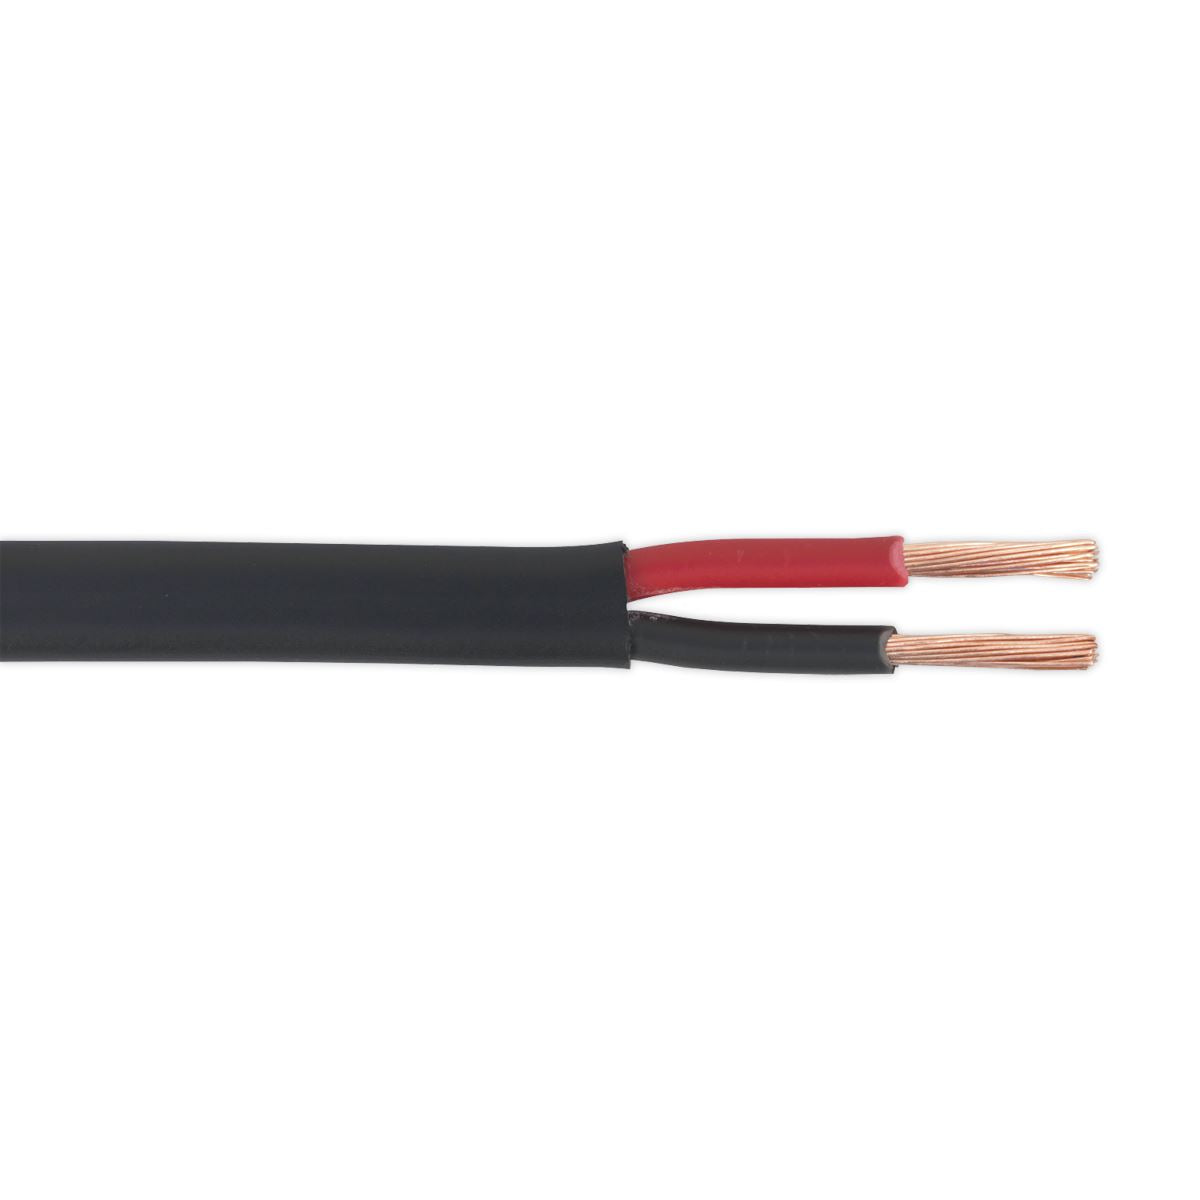 Sealey Automotive Cable Thick Wall Flat Twin 2 x 2mm² 28/0.30mm 30m Black